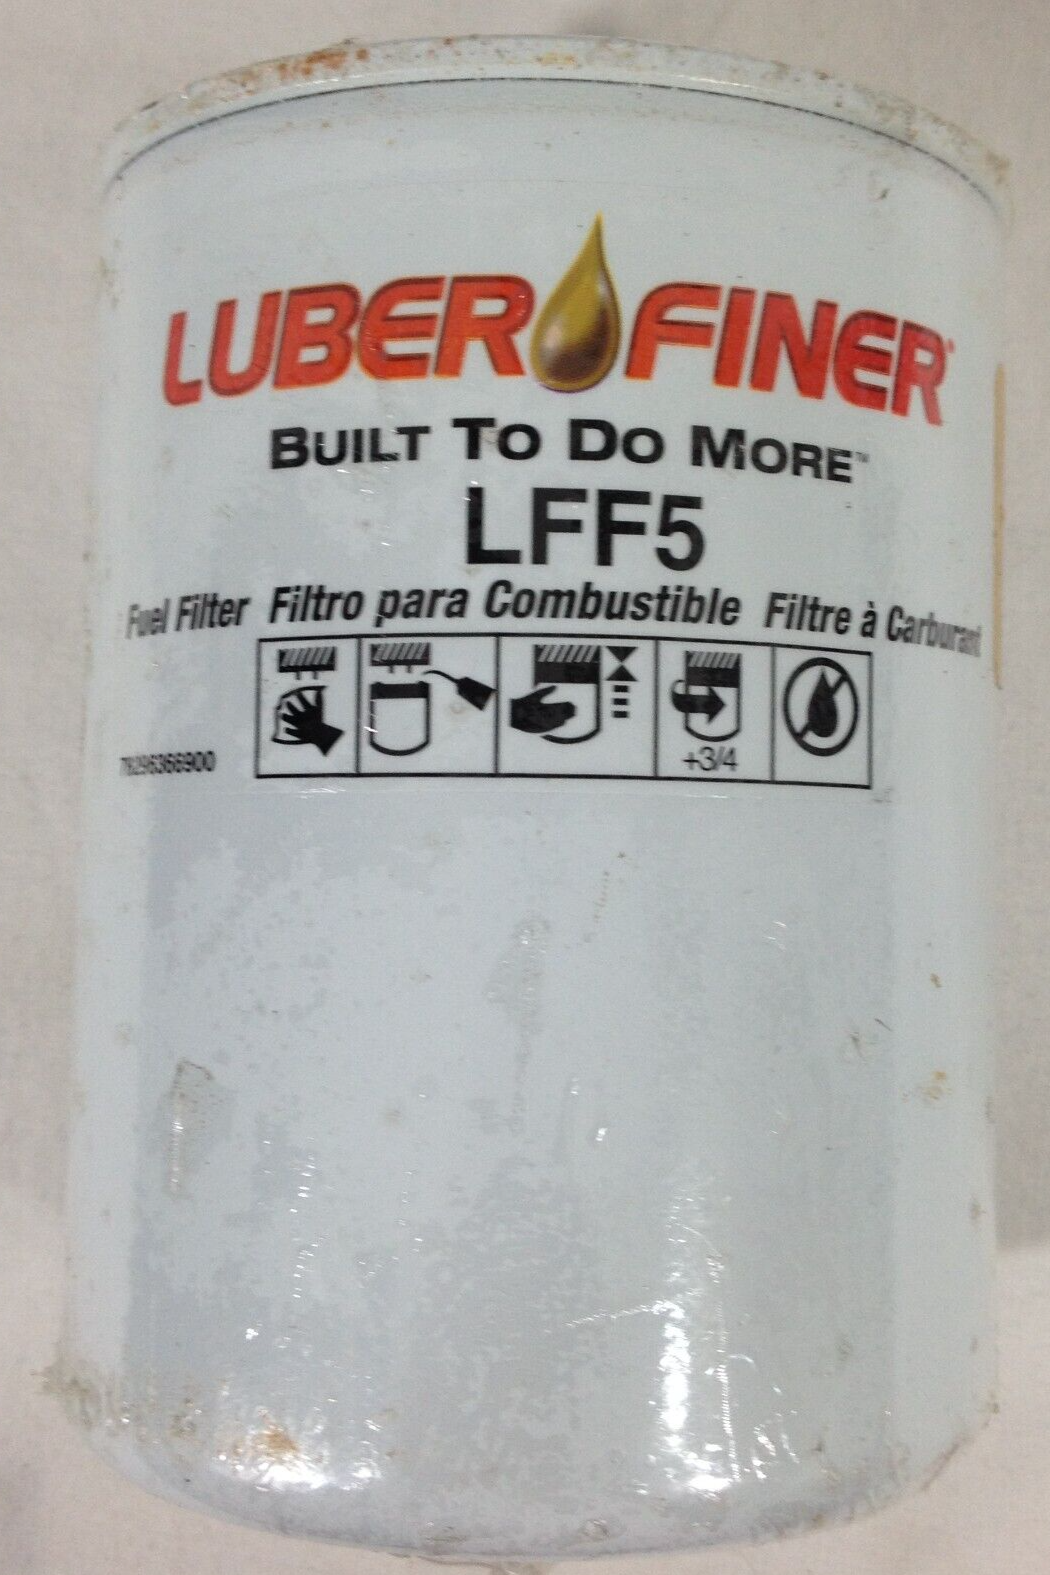 Primary image for Luber-Finer LFF-5 SPIN-ON FUEL FILTER  ( WIX 33109 ) NEW